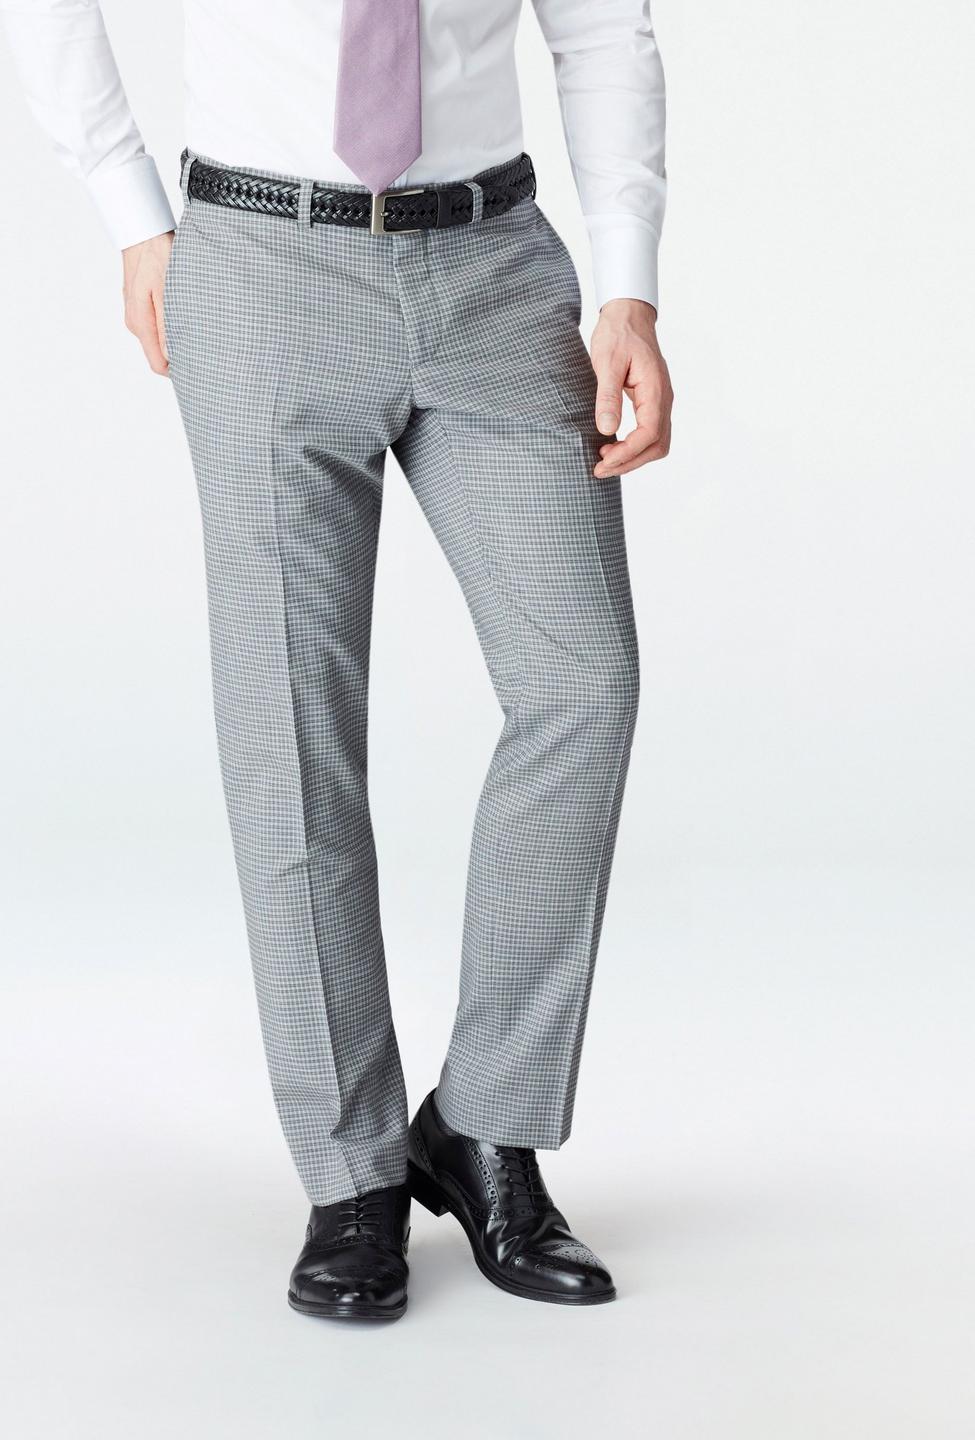 Gray pants - Coalville Checked Design from Seasonal Indochino Collection